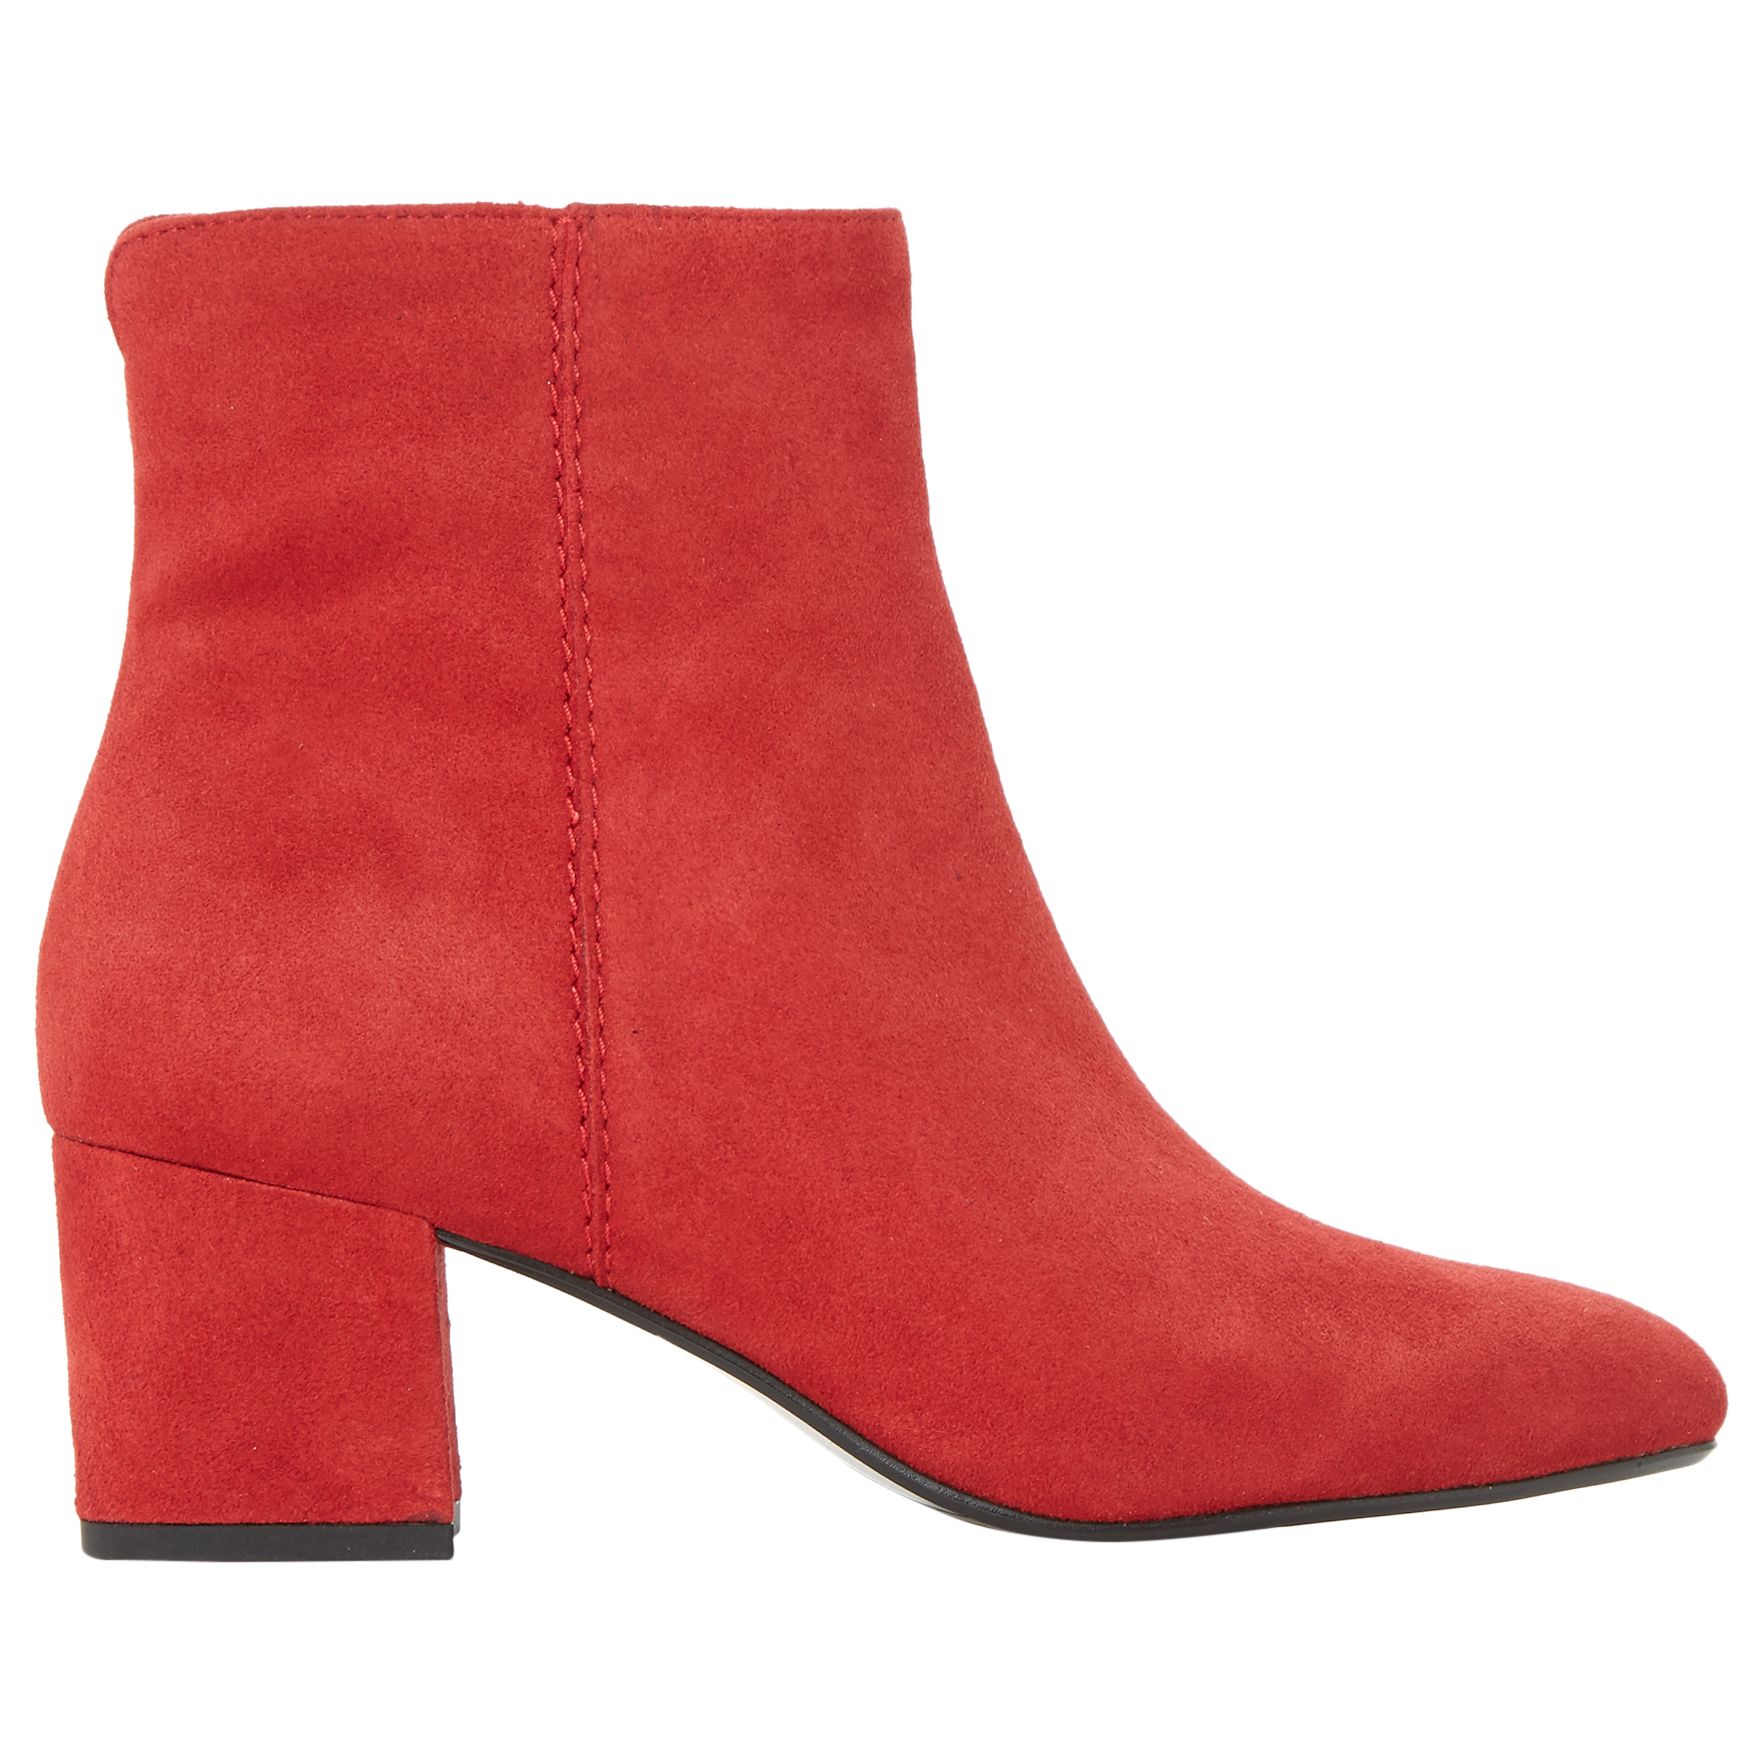 Dune Olyvea Block Heeled Ankle Boots, Red Suede, 8